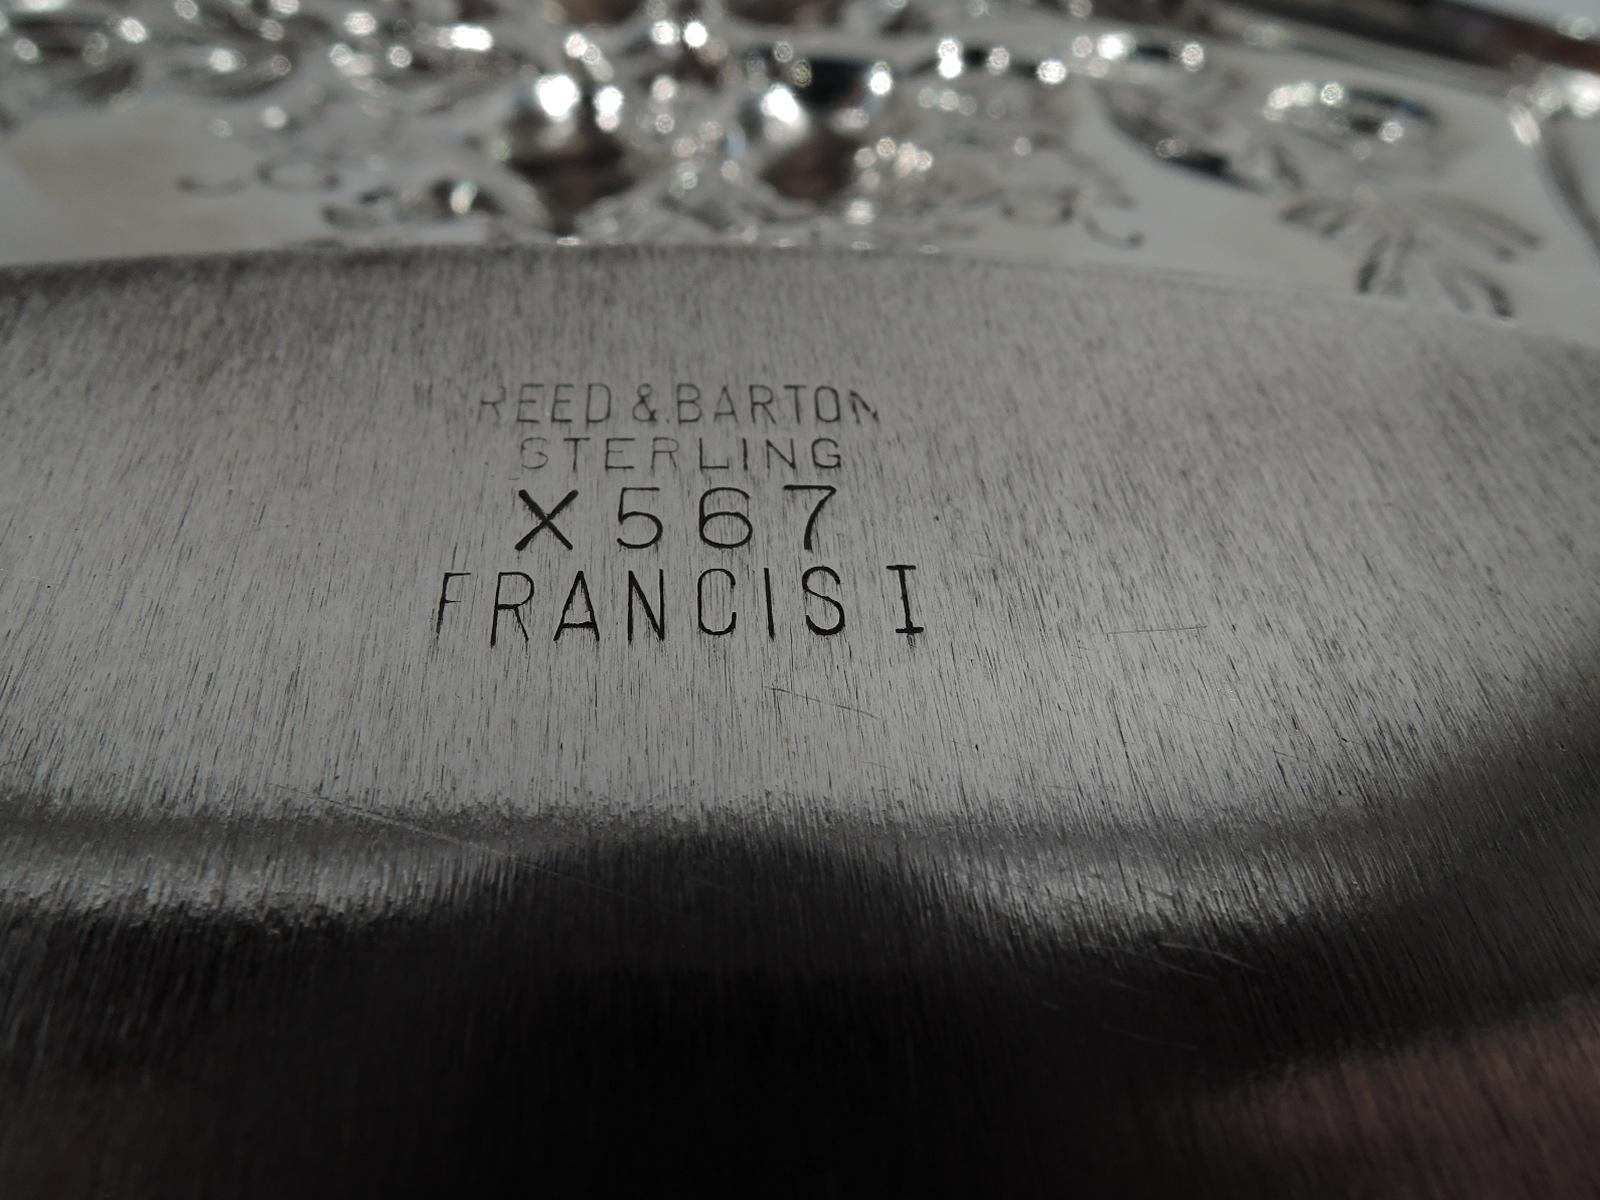 American Reed & Barton Francis I Sterling Silver Serving Plate